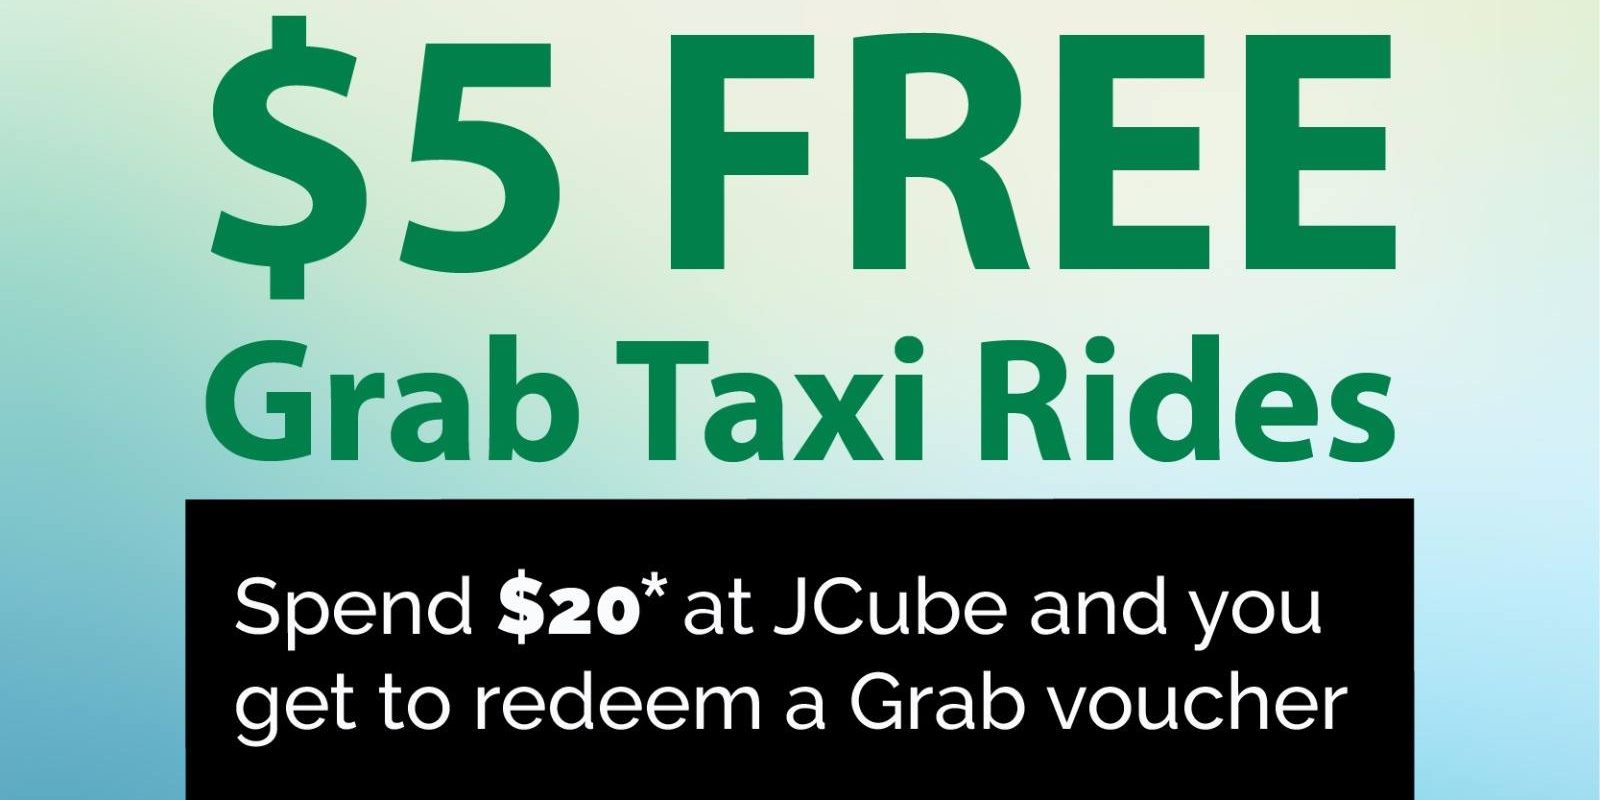 JCube Singapore is giving away $5 FREE GrabTaxi Rides Voucher